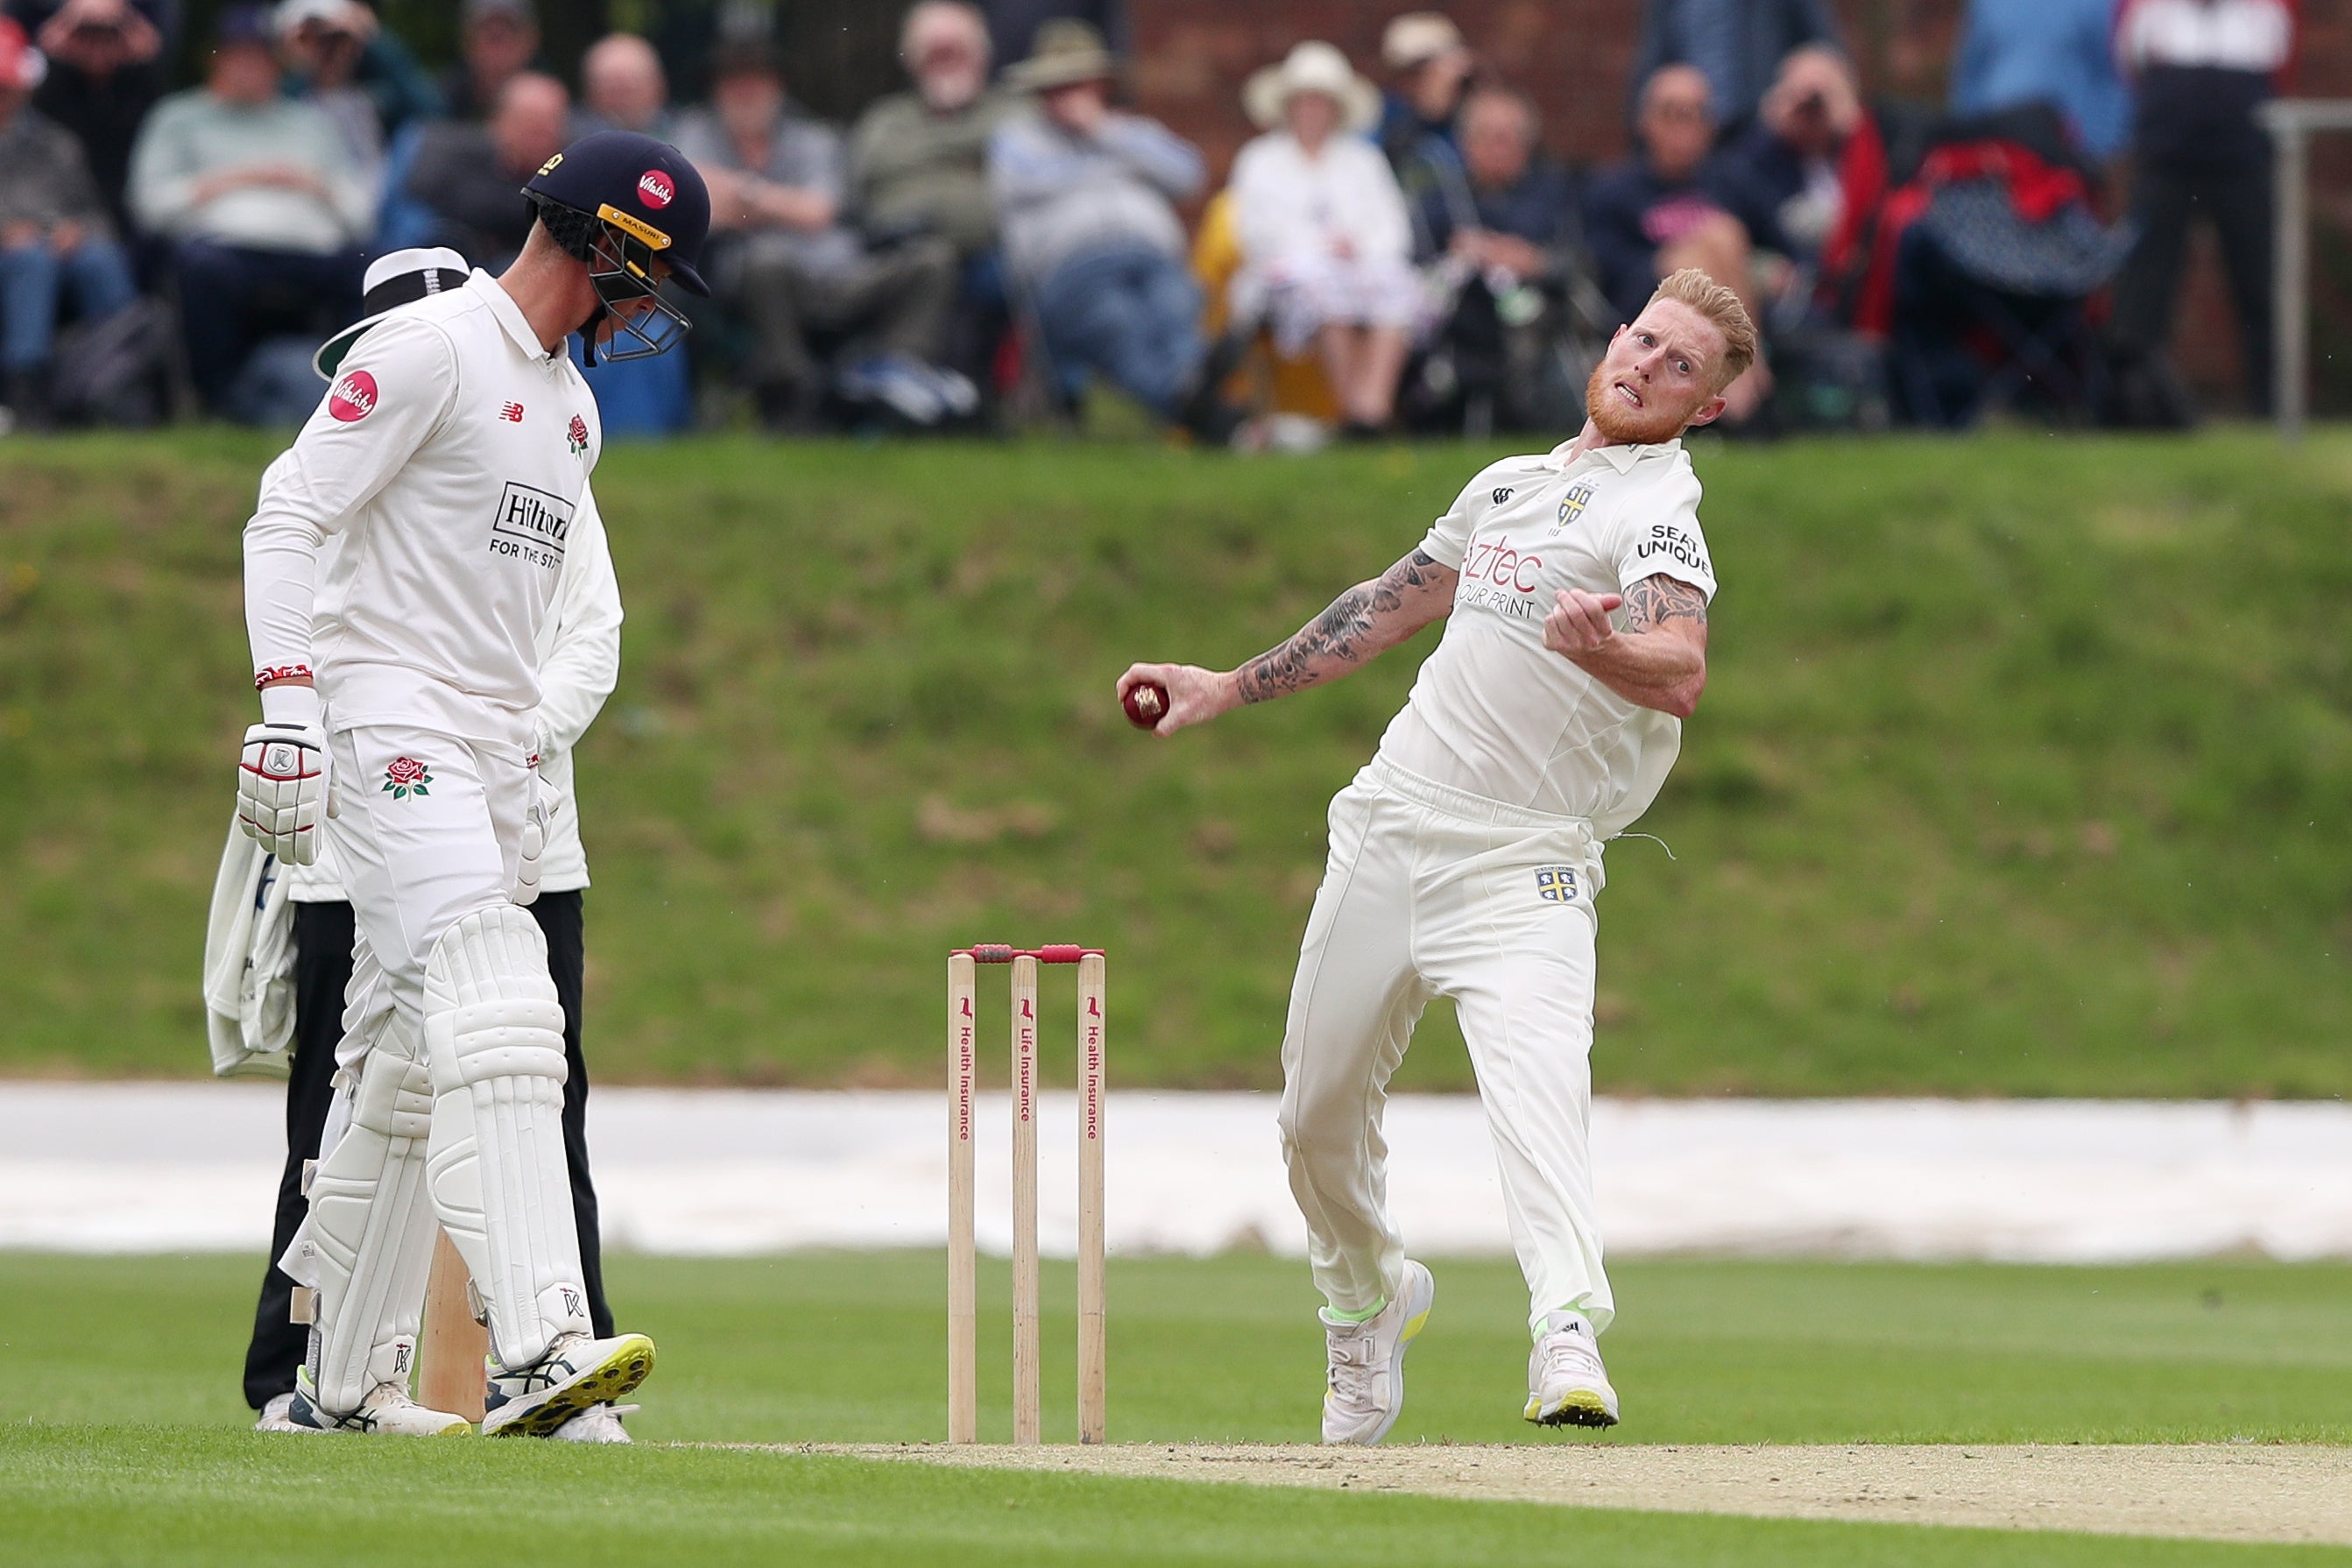 Stokes hopes to face the West Indies and Sri Lanka this summer after recovering from the knee surgery he underwent in November